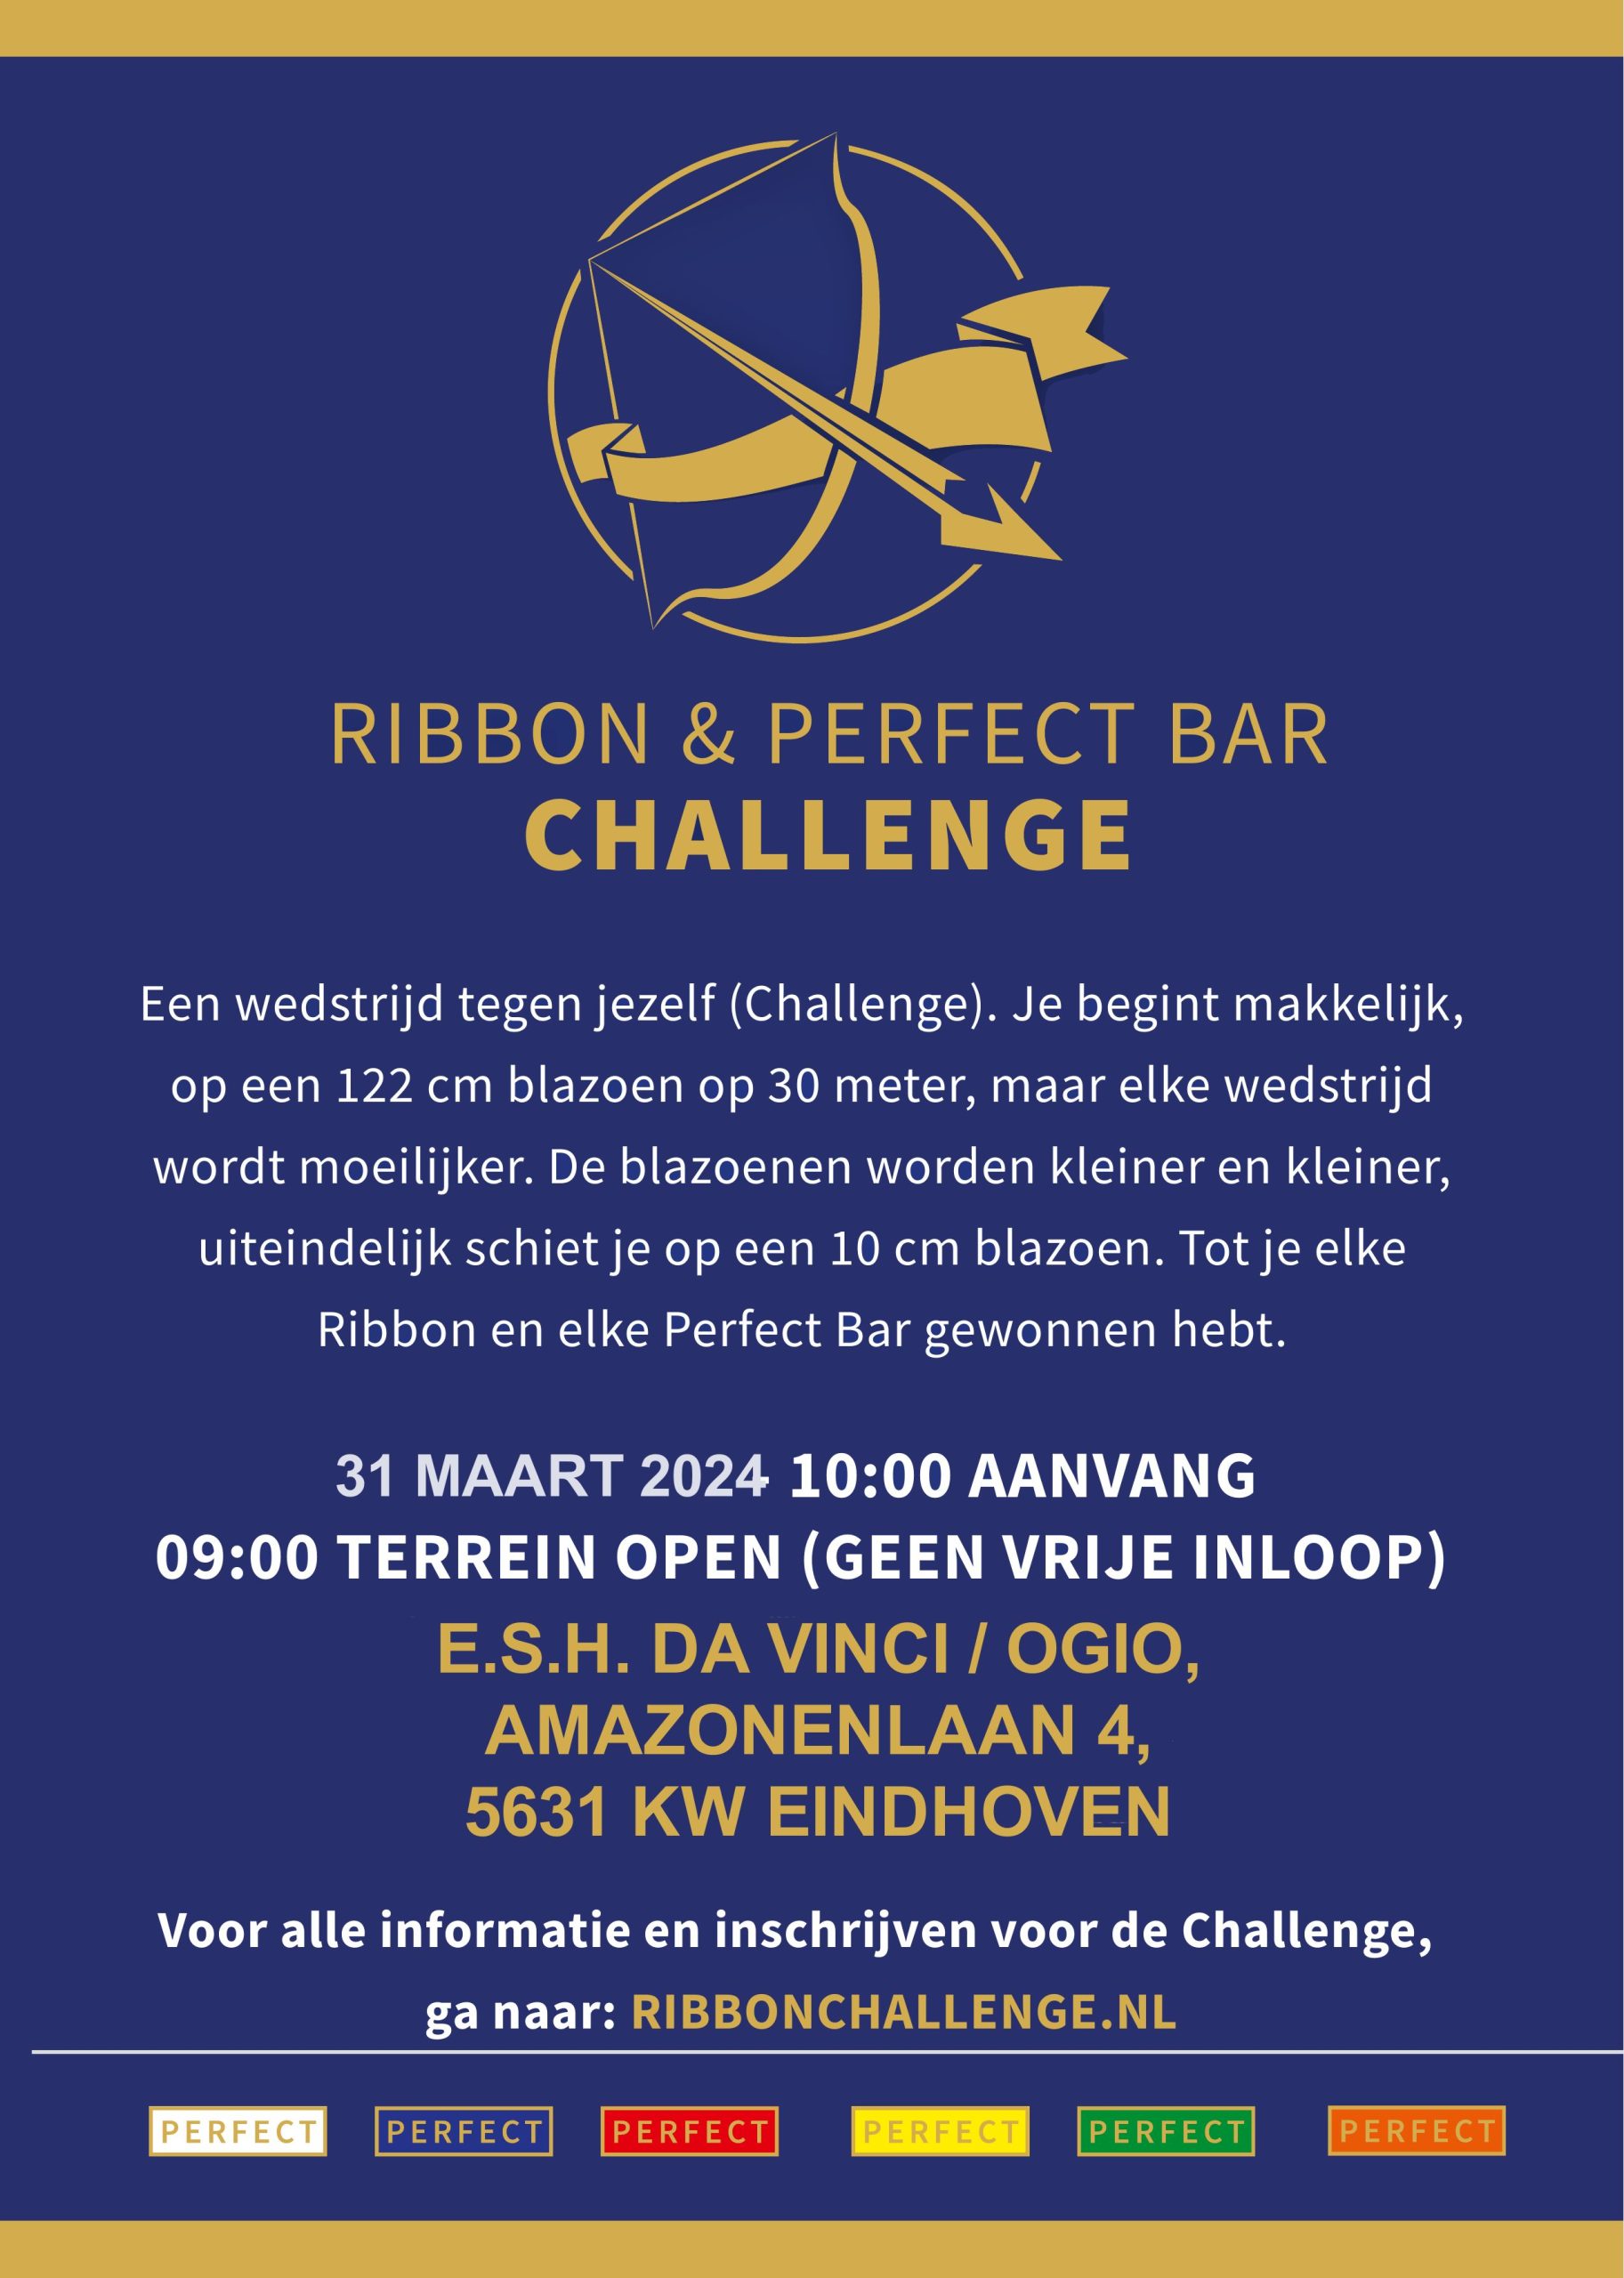 Ribbon and Perfect Bar Challenge Eindhoven